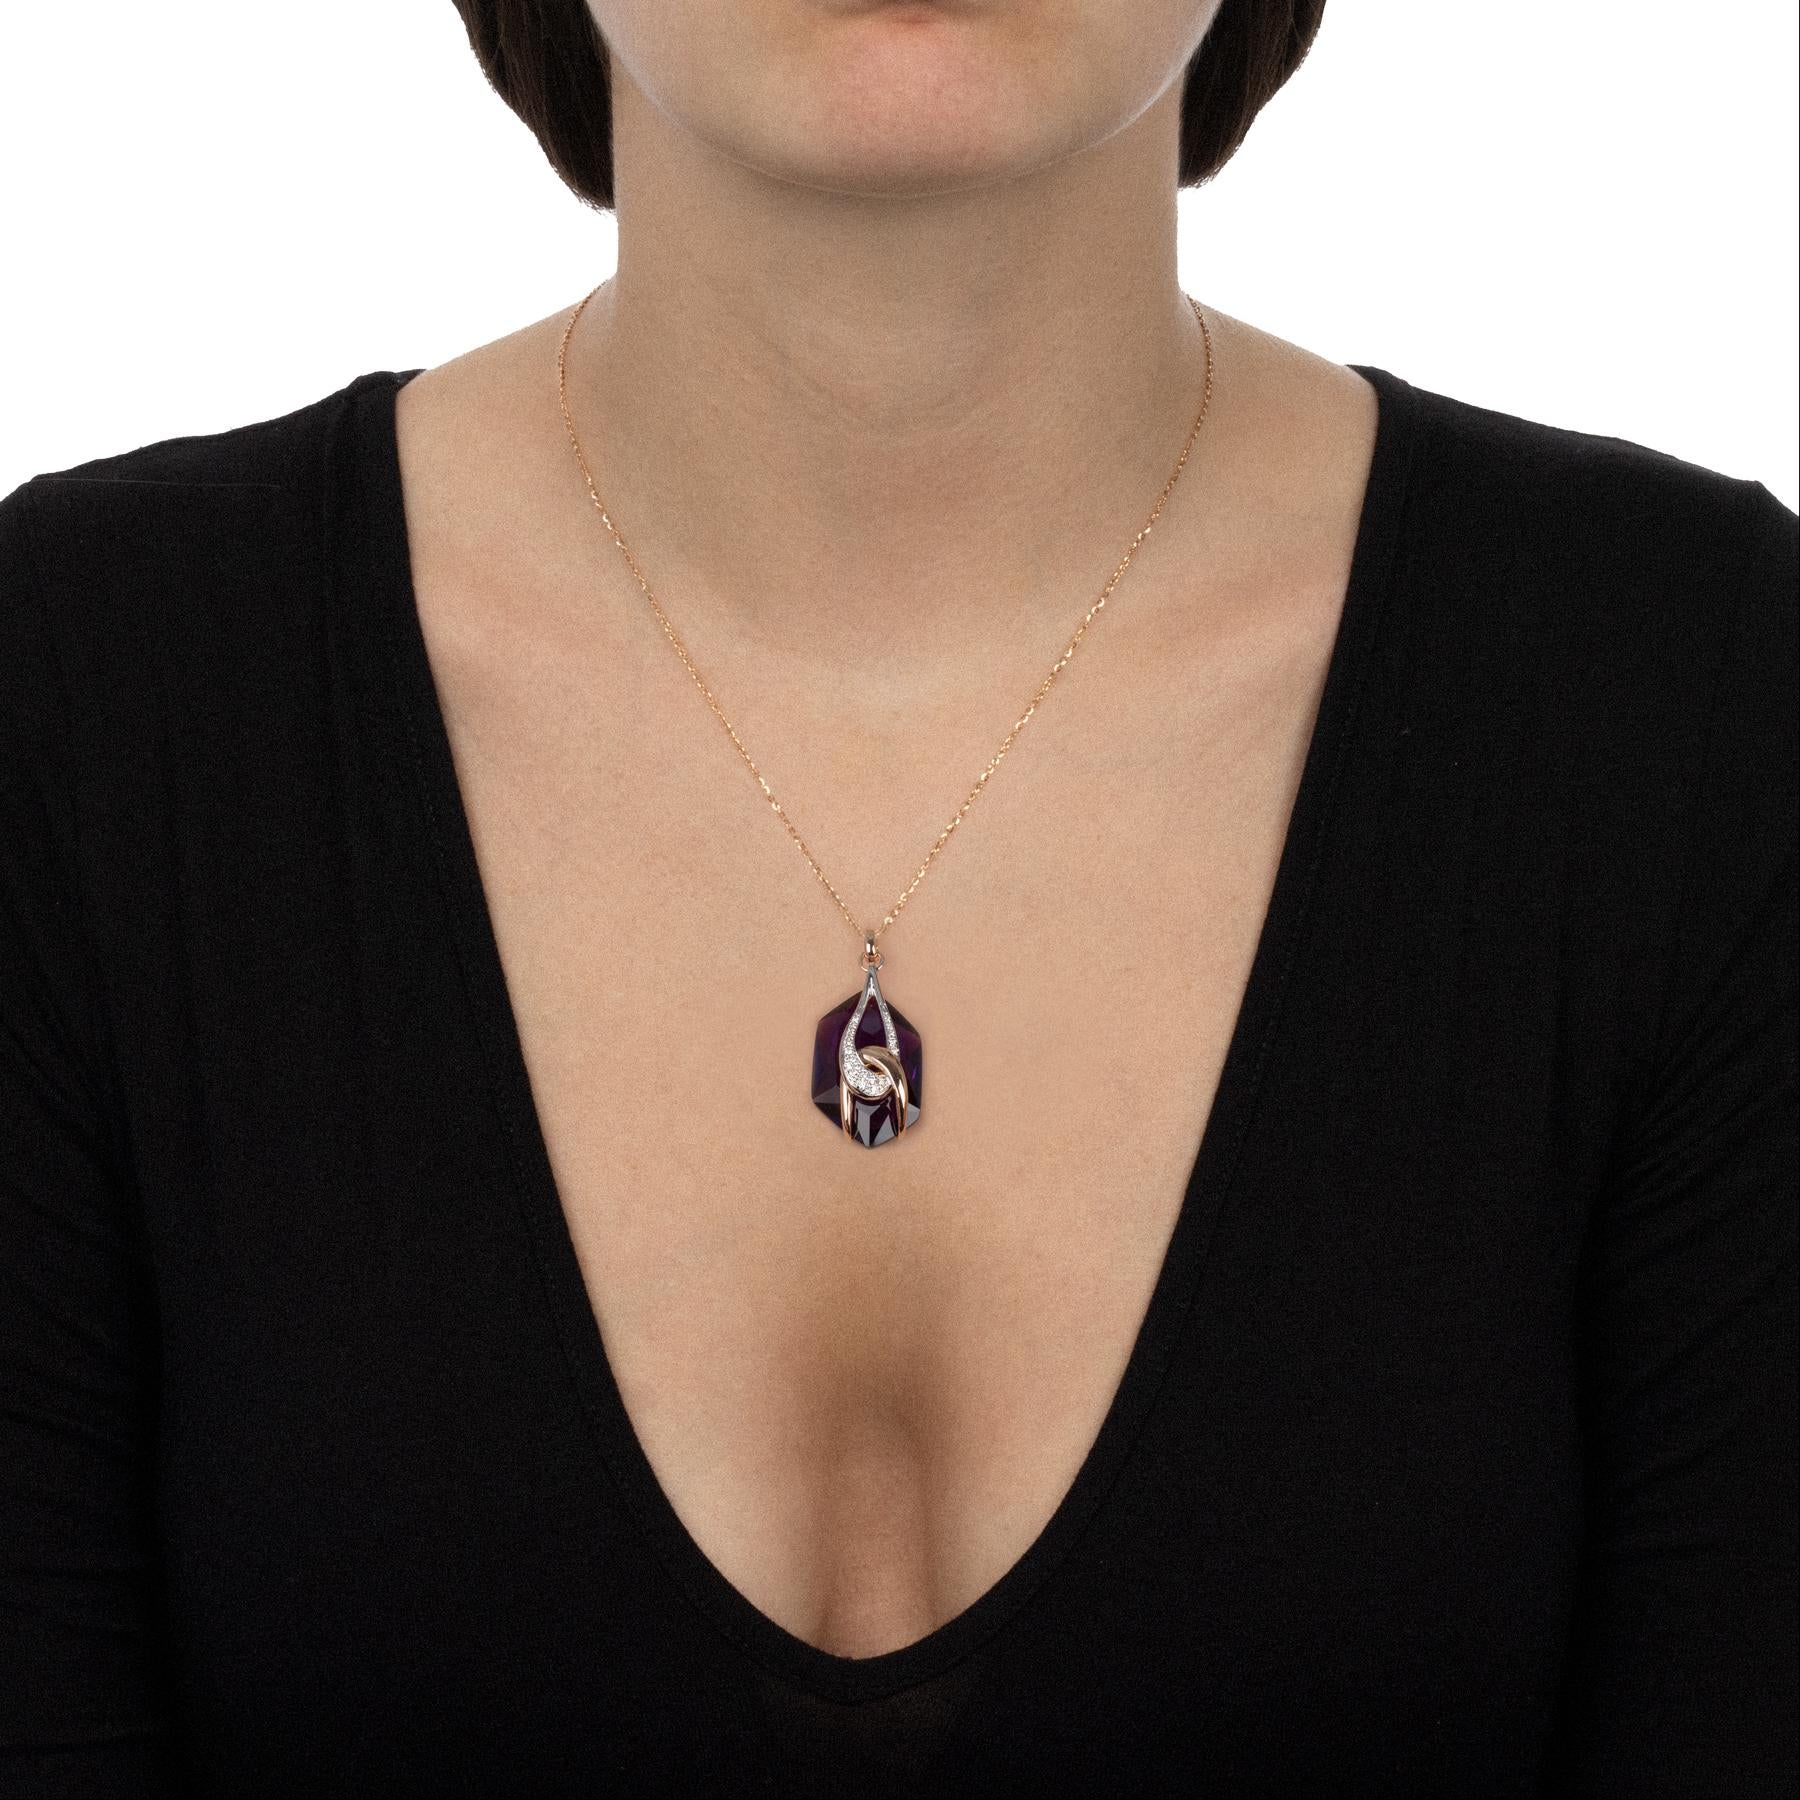 A handmade contemporary jewellery piece with a modern design, this pendant necklace is a dazzling fashion statement. The evocative charm of the central amethyst blends with the innovative design of the intertwined decoration blends with the embrace